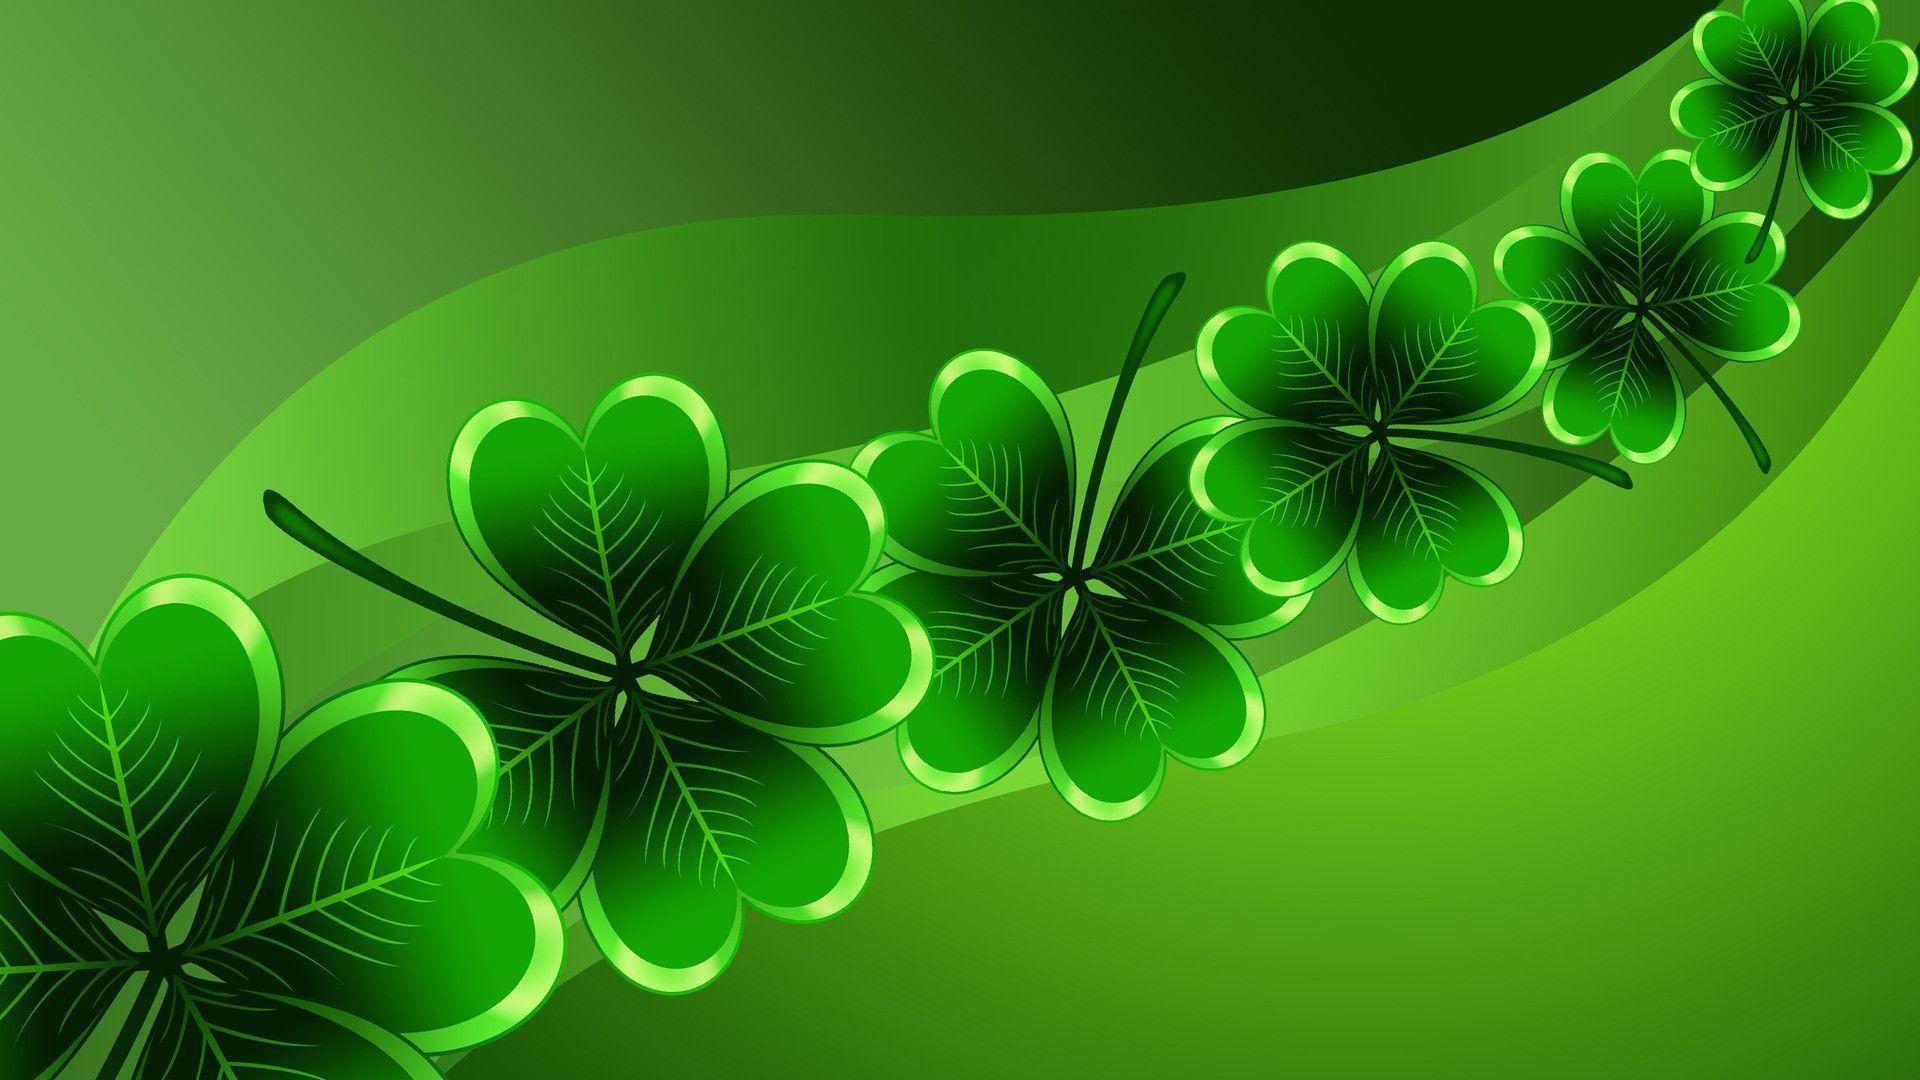 Download St Pattys Day Desktop Wallpaper or Lock Screen Designs From Be  Well  Be Well